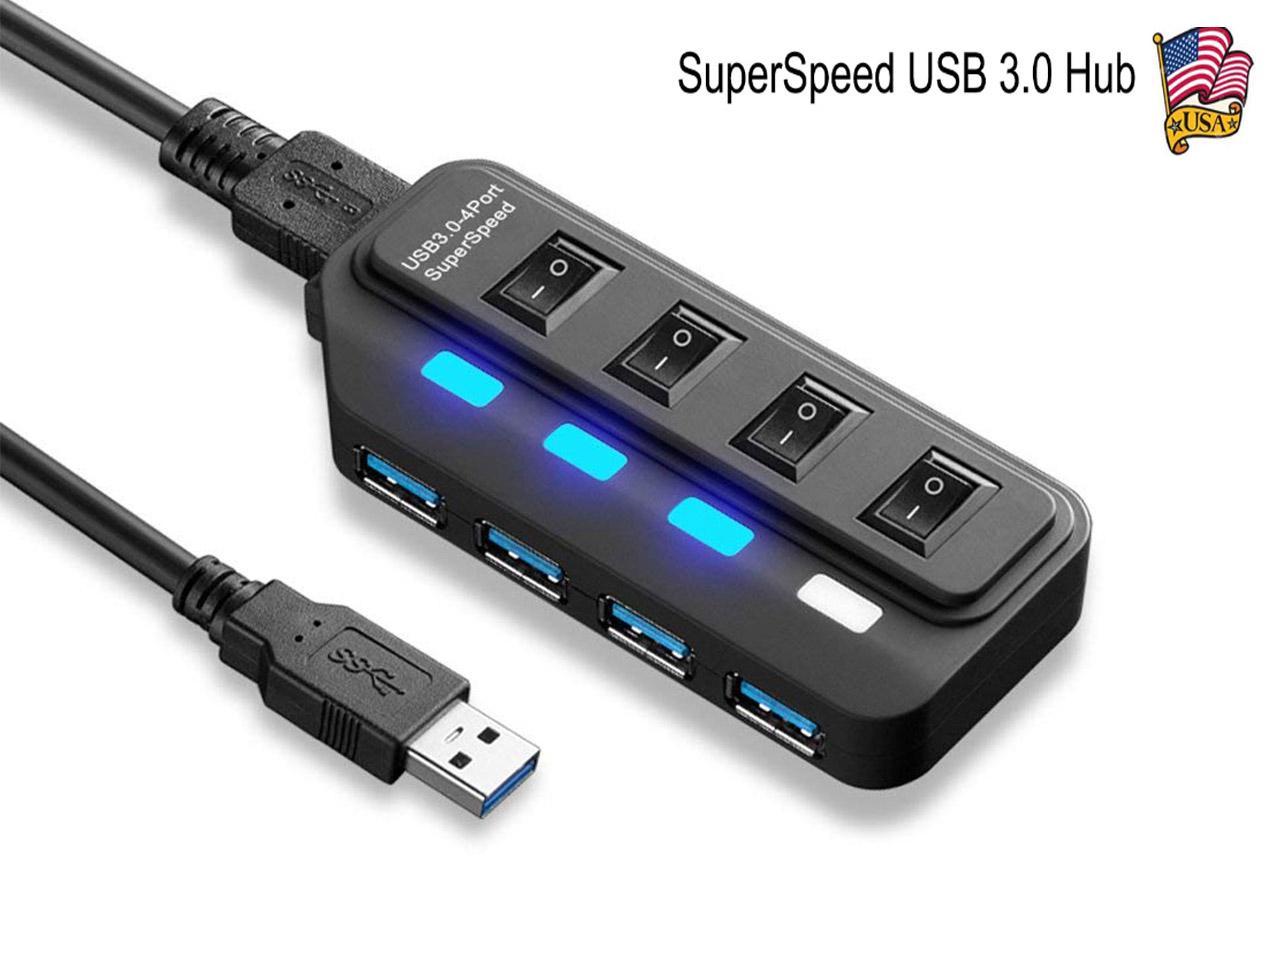 Bailink 4 Port USB Hub, Portable SuperSpeed USB 3.0 Hub, Individual On/Off  Switches LED, USB Extension Multi-function USB Dock Hot Swapping Support 